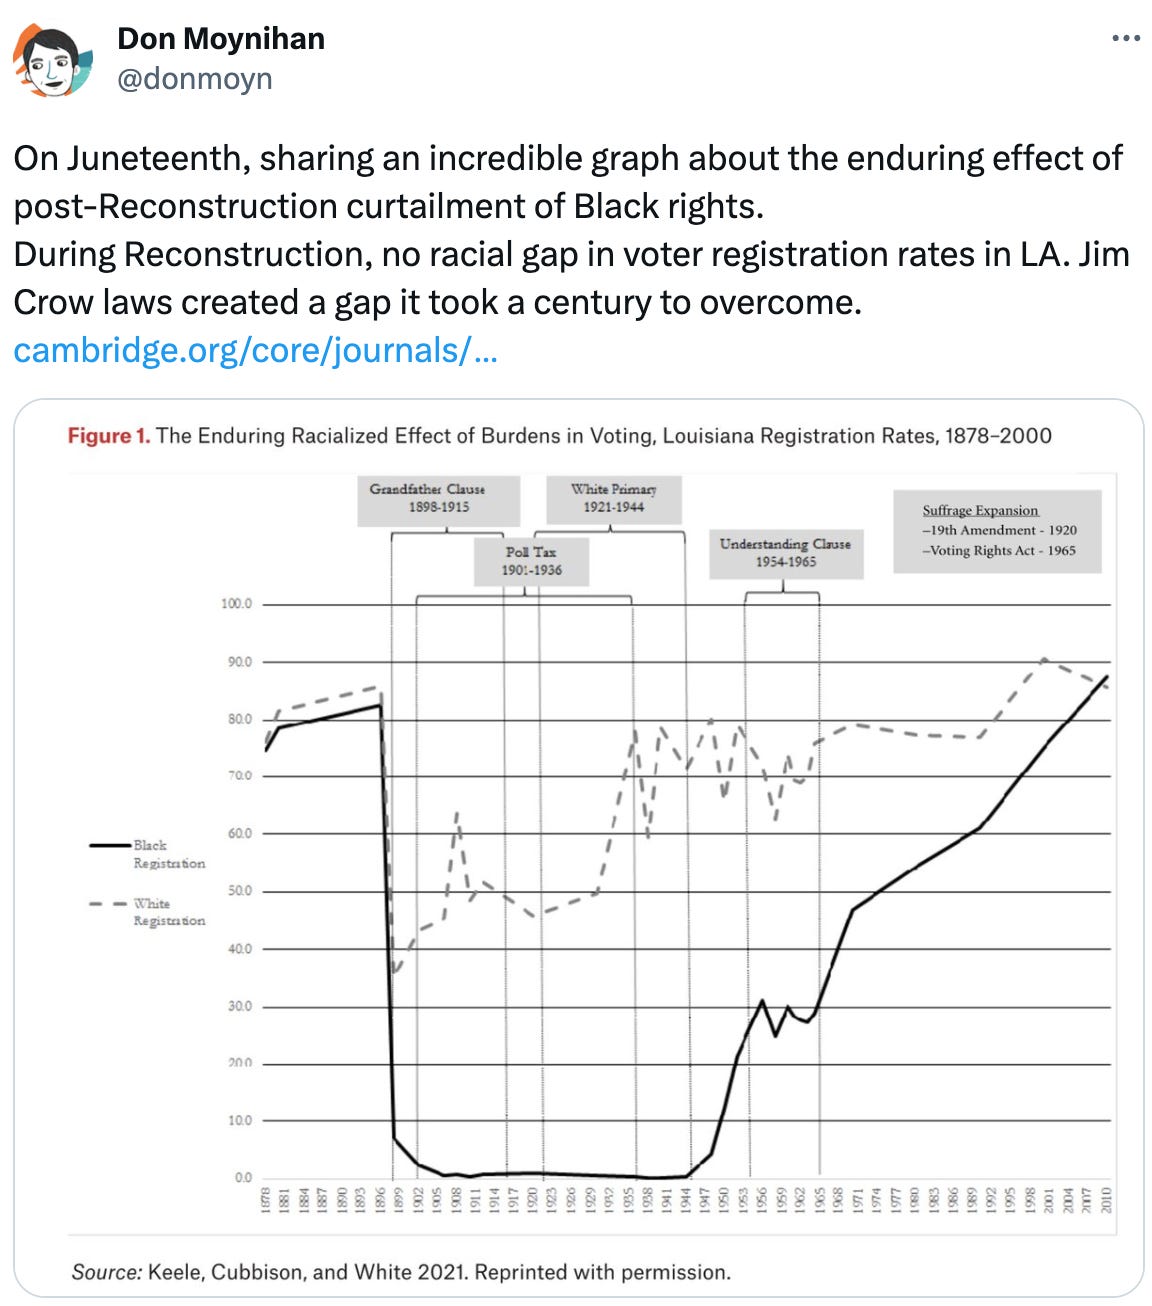  Don Moynihan @donmoyn On Juneteenth, sharing an incredible graph about the enduring effect of post-Reconstruction curtailment of Black rights. During Reconstruction, no racial gap in voter registration rates in LA. Jim Crow laws created a gap it took a century to overcome. https://cambridge.org/core/journals/american-political-science-review/article/abs/suppressing-black-votes-a-historical-case-study-of-voting-restrictions-in-louisiana/662970B089BC99495ADC2F6E3CBF61FD